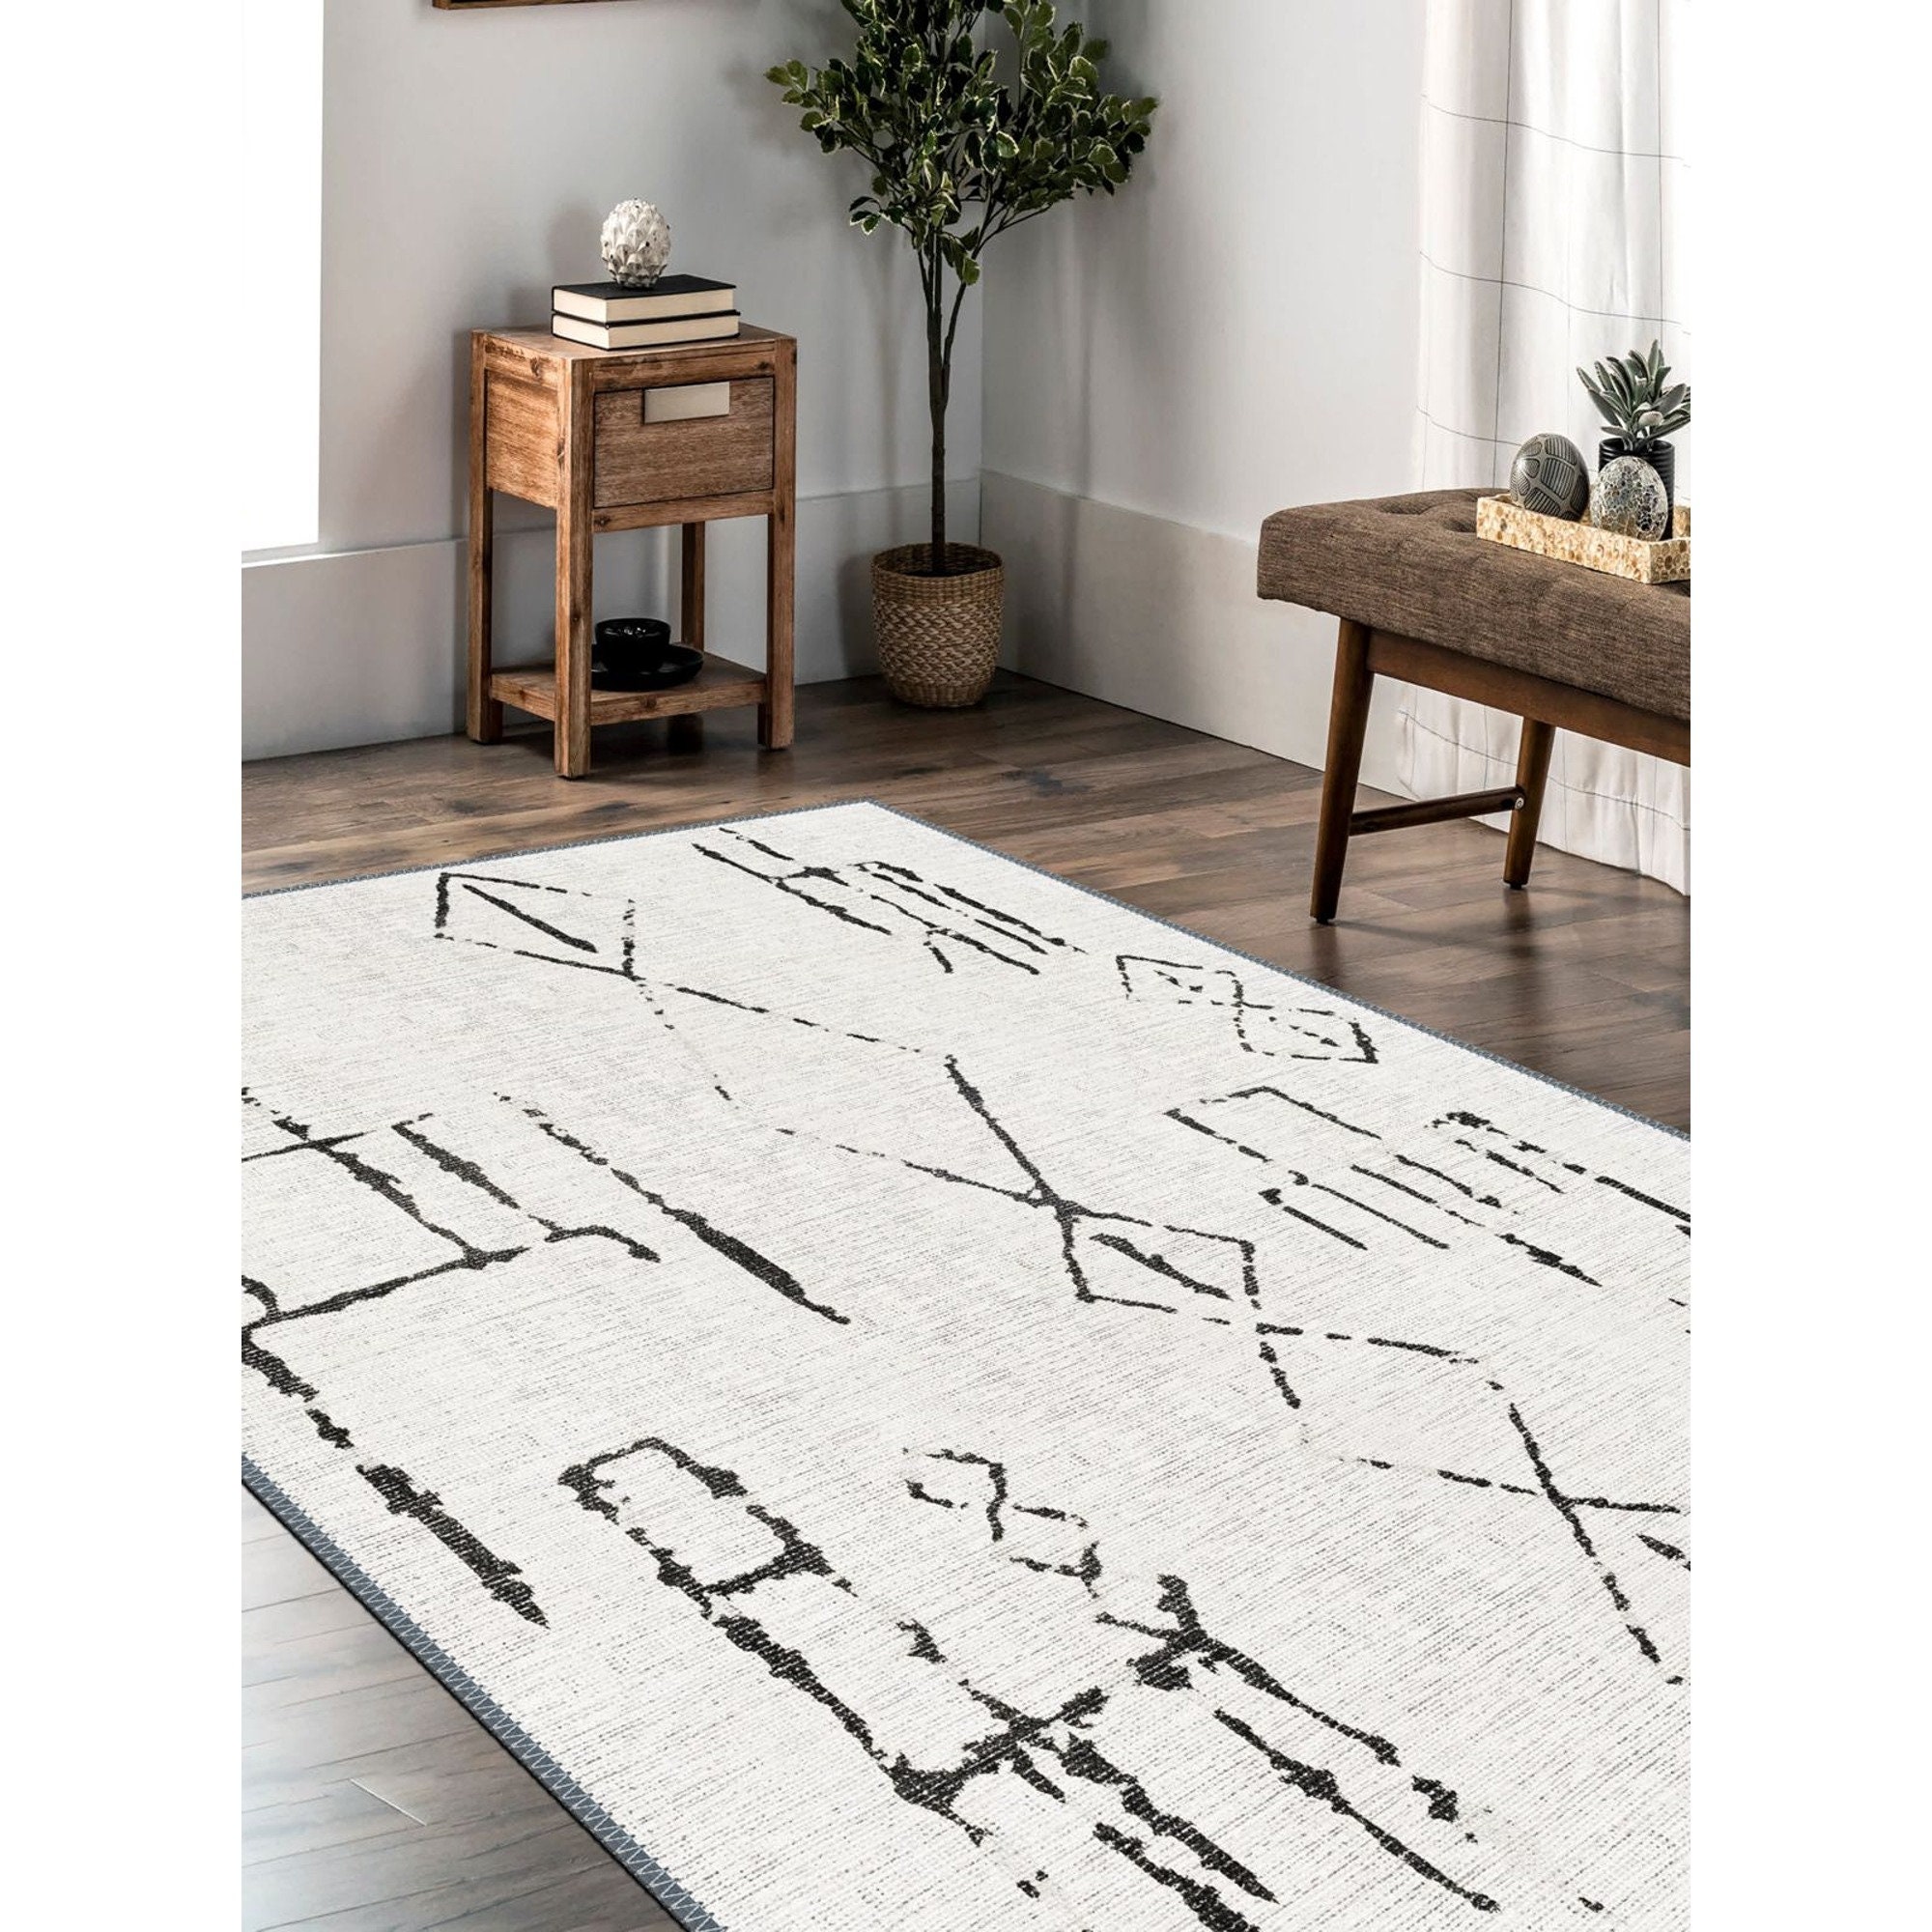  RUUGME Boho Rugs for Living Room 3 X 5,Super Soft Faux Rabbit  Fur Boho Area Rug,Washable and Stain Resistant Farmhouse Morrocan Rug,Thick  and No Smell Bohemian Decor Rugs (White, 3' x